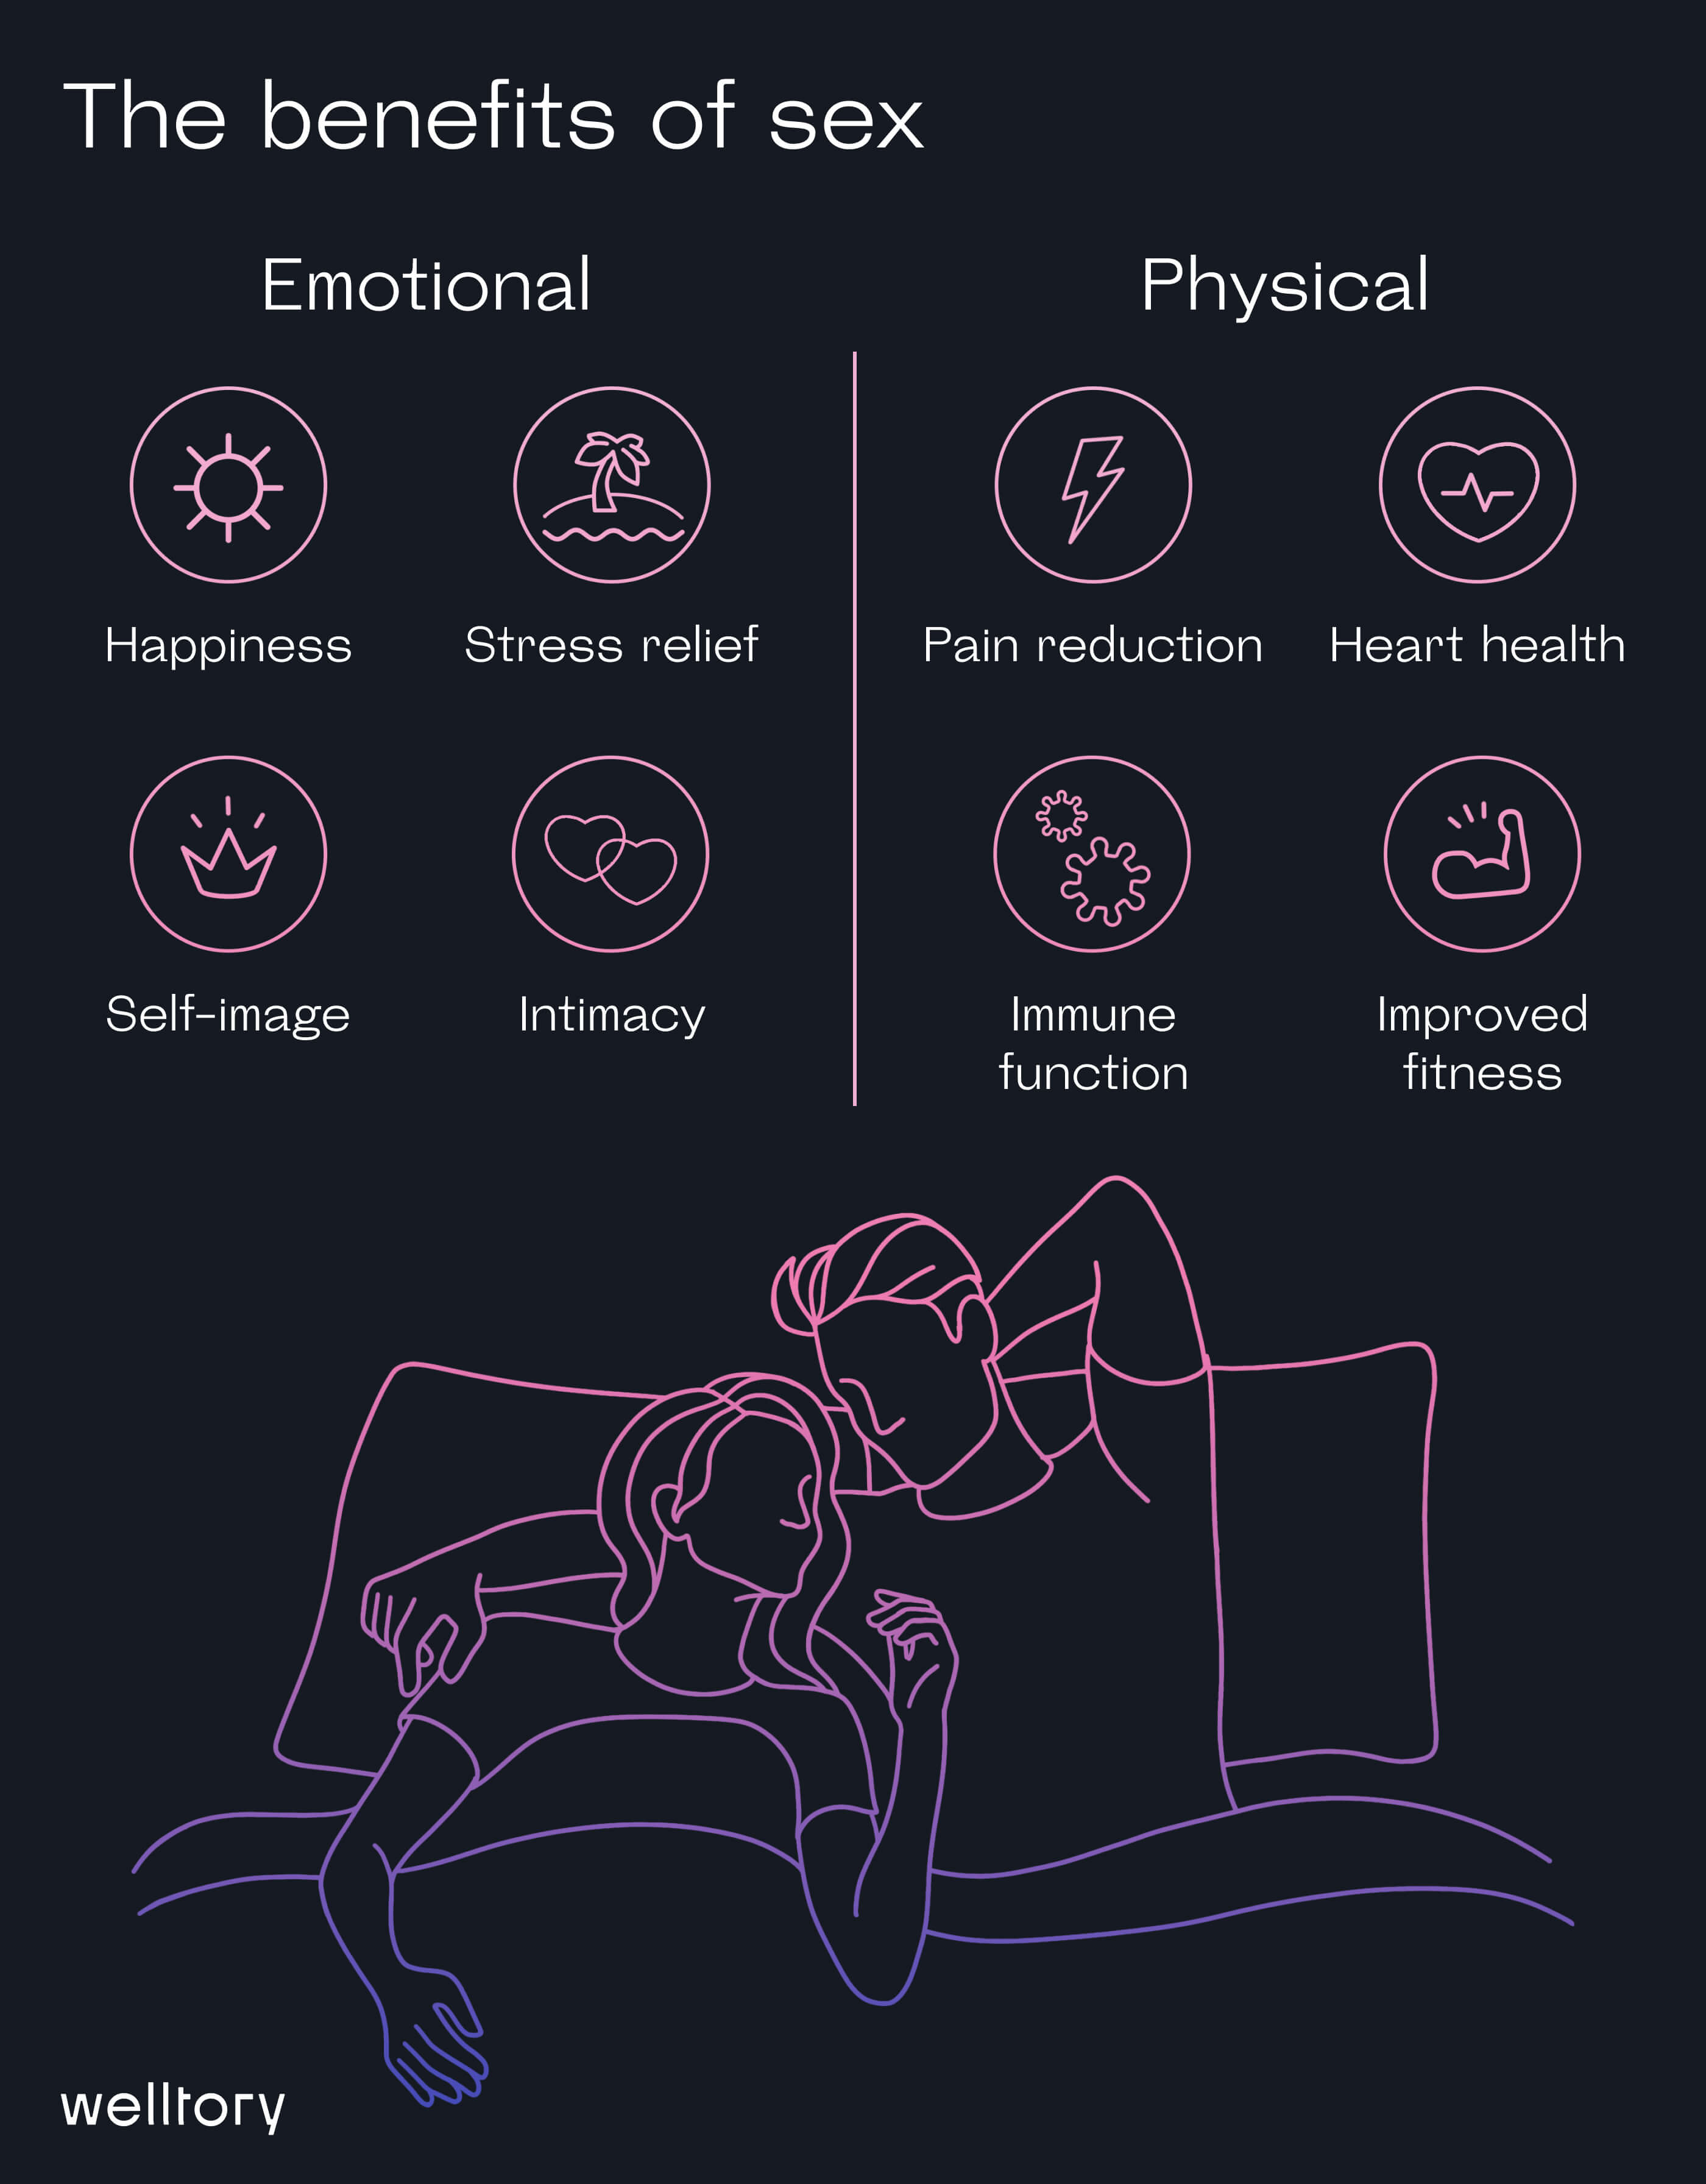 The benefits of sex icons with titles divided into Emotional and Physical categories with men and woman lying in bed contours